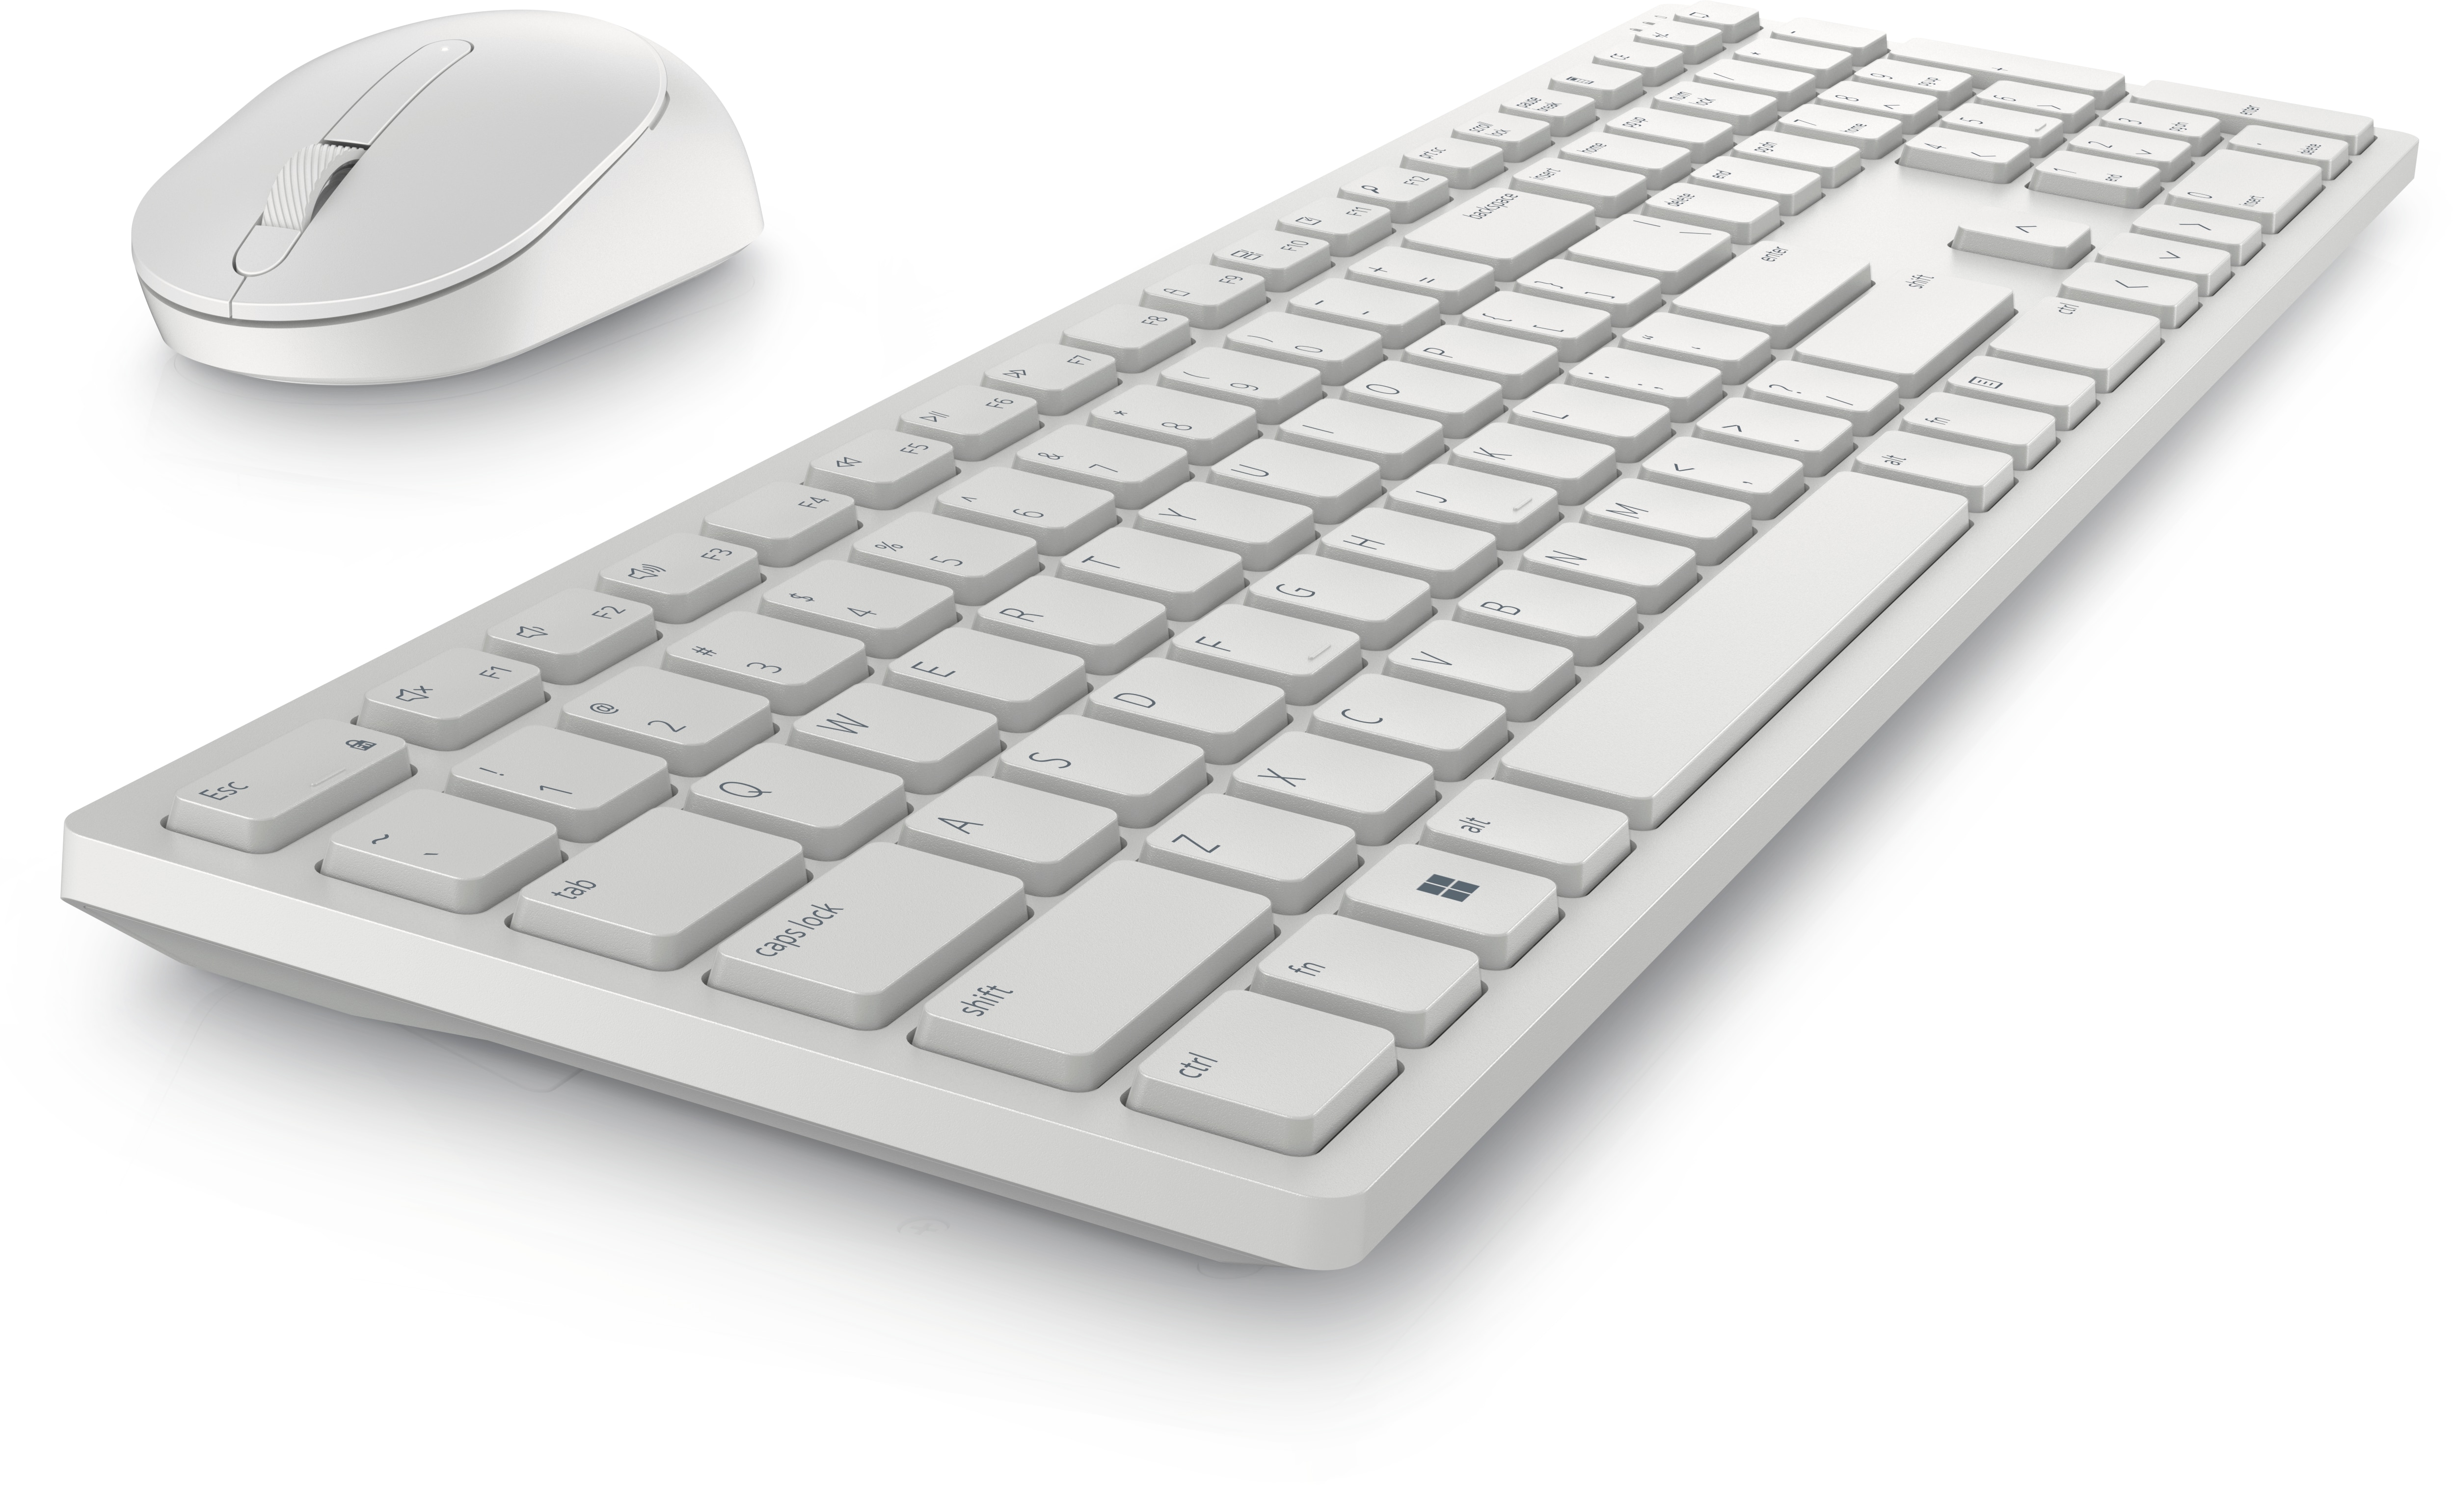 Dell Pro Wireless Keyboard and Mouse – KM5221W White | Dell USA